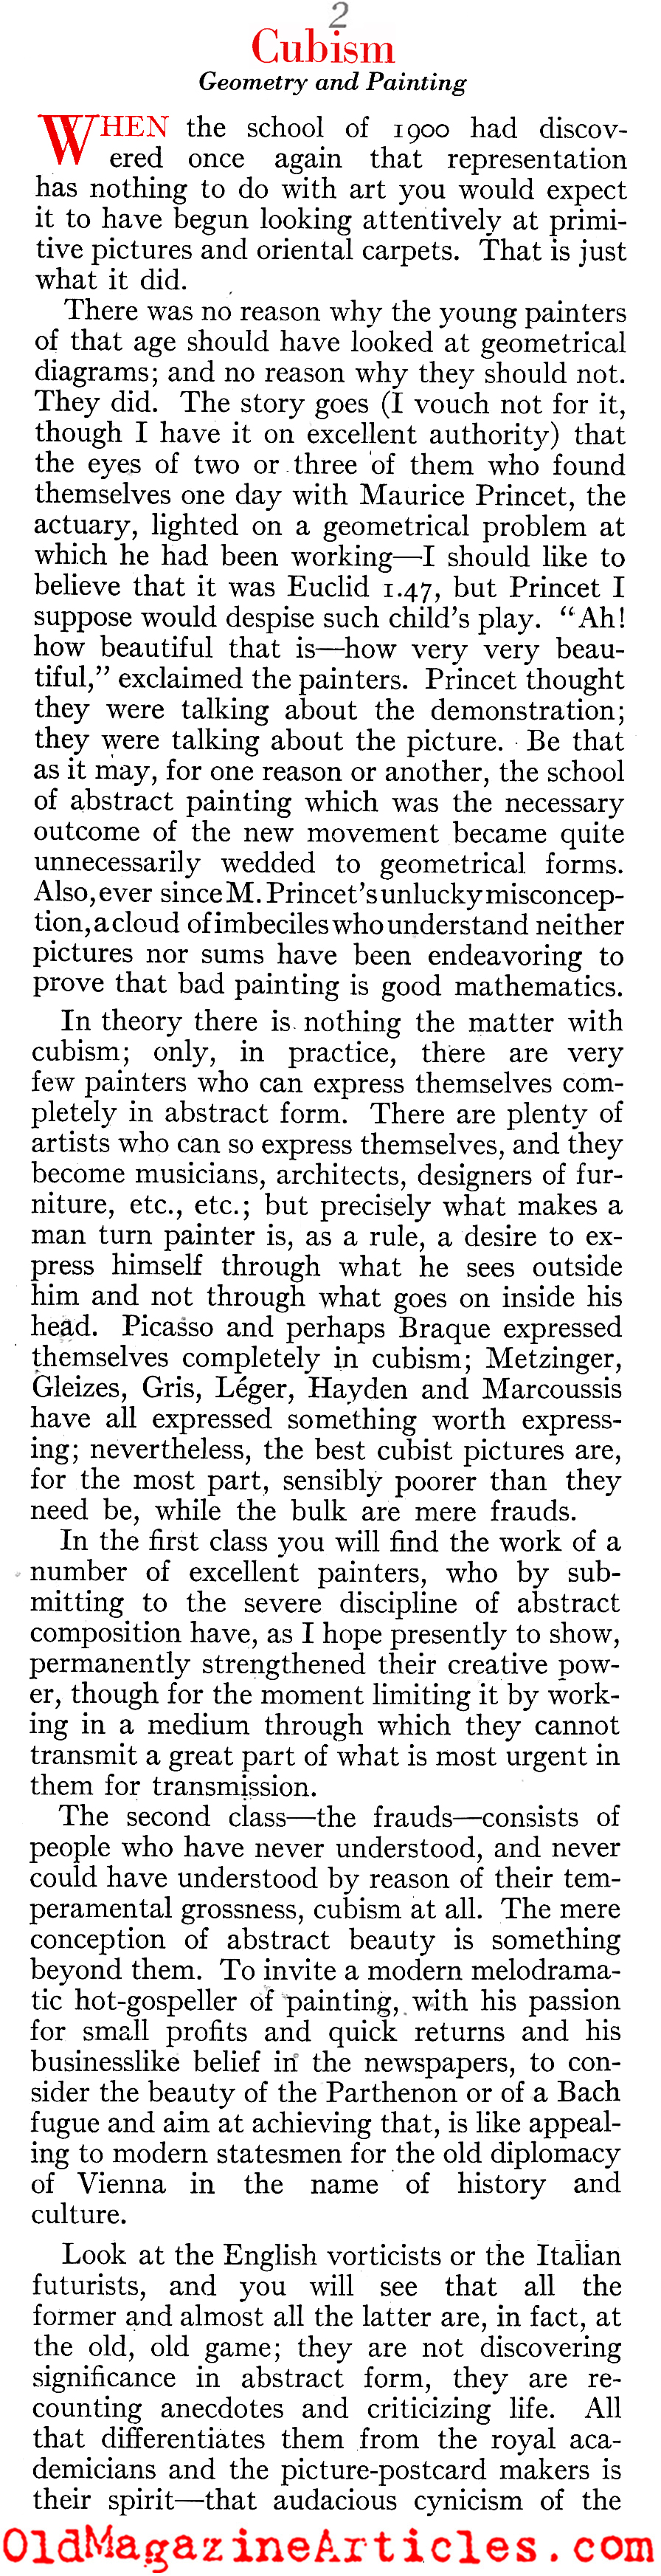 The Rise and Fall of Cubism (Vanity fair, 1923)